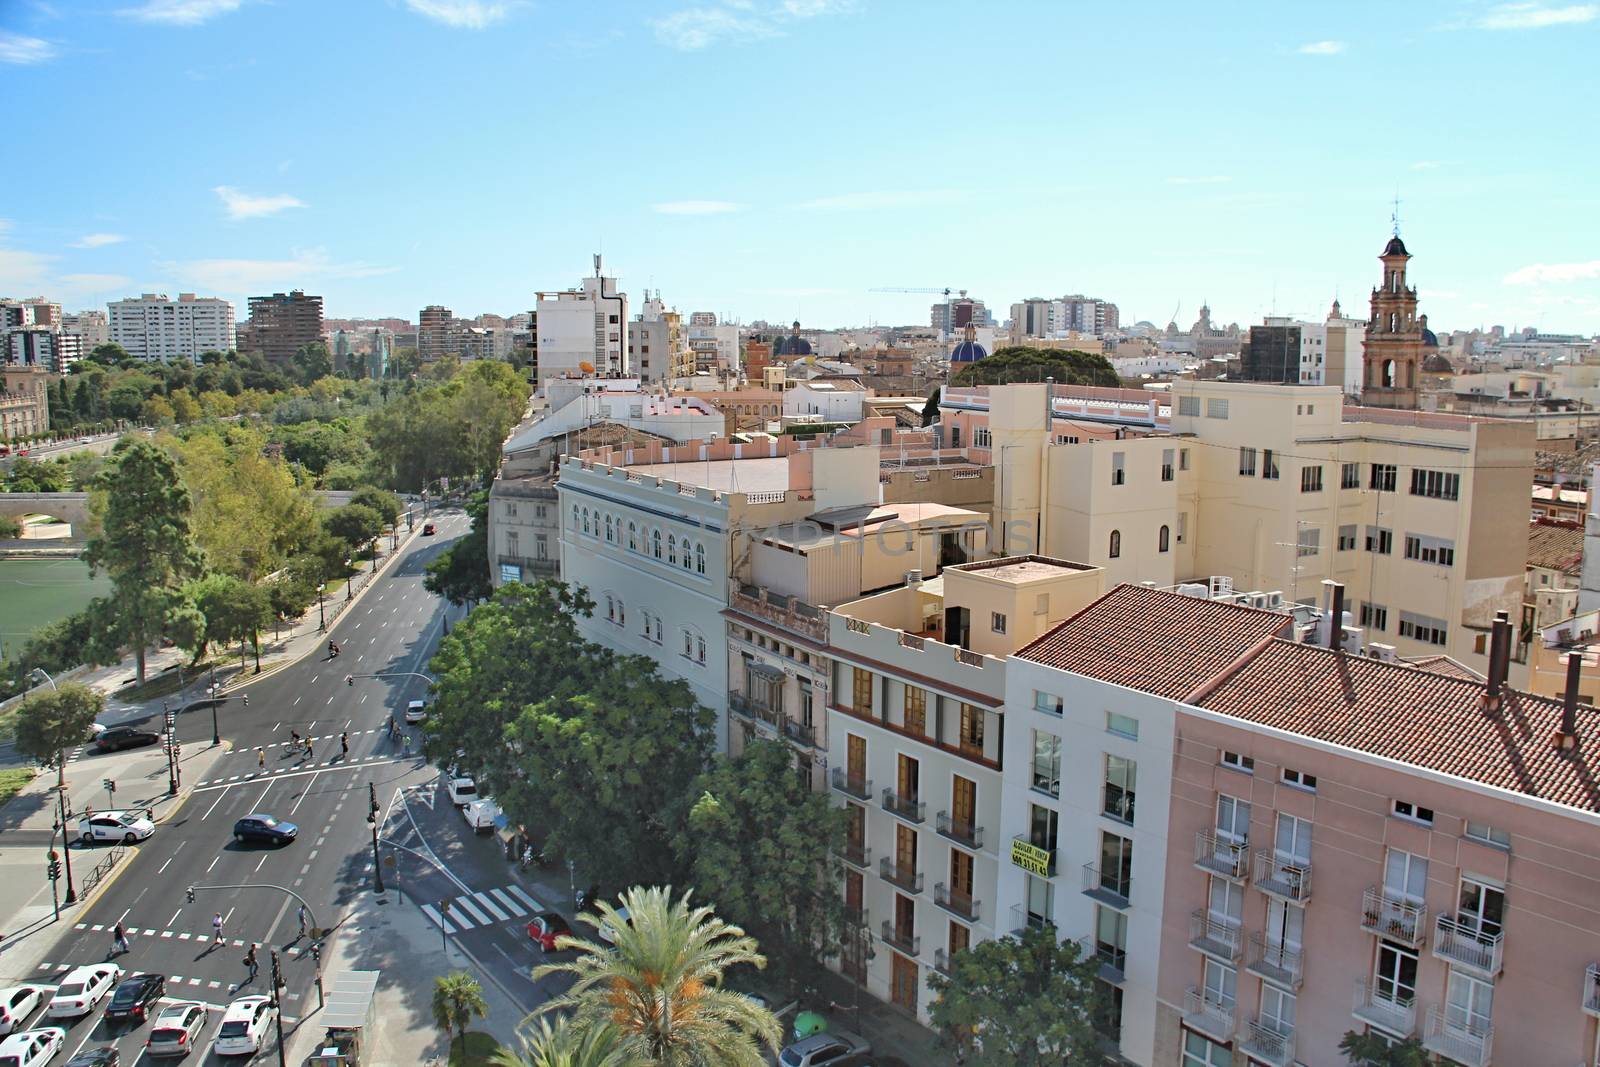 Photo of City of Valencia, Spain made in the late Summer time in Spain, 2013